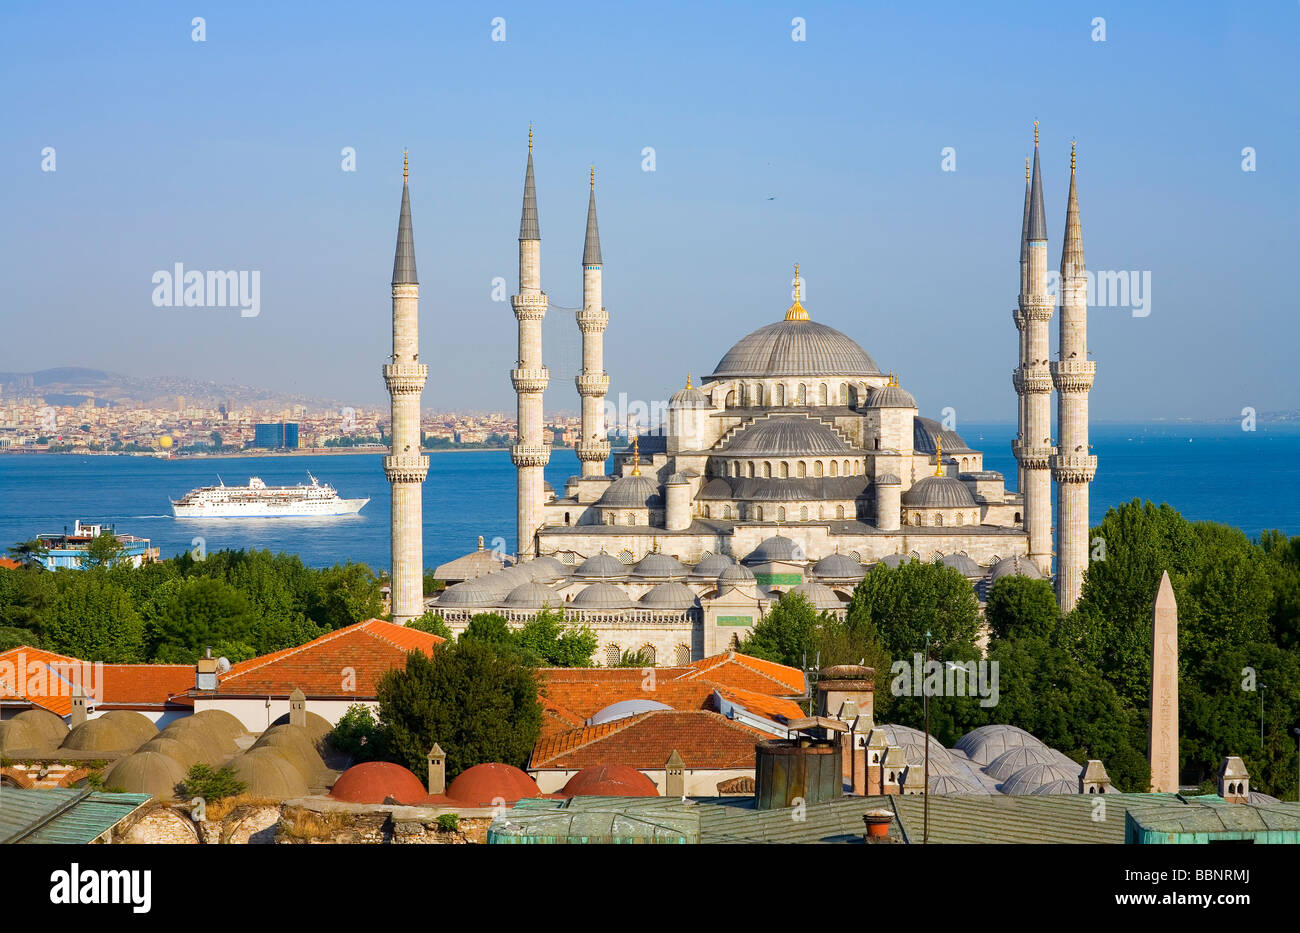 The Blue Mosque Sultan Ahmet Camii looking across the Bosphorus in background Istanbul Turkey Stock Photo